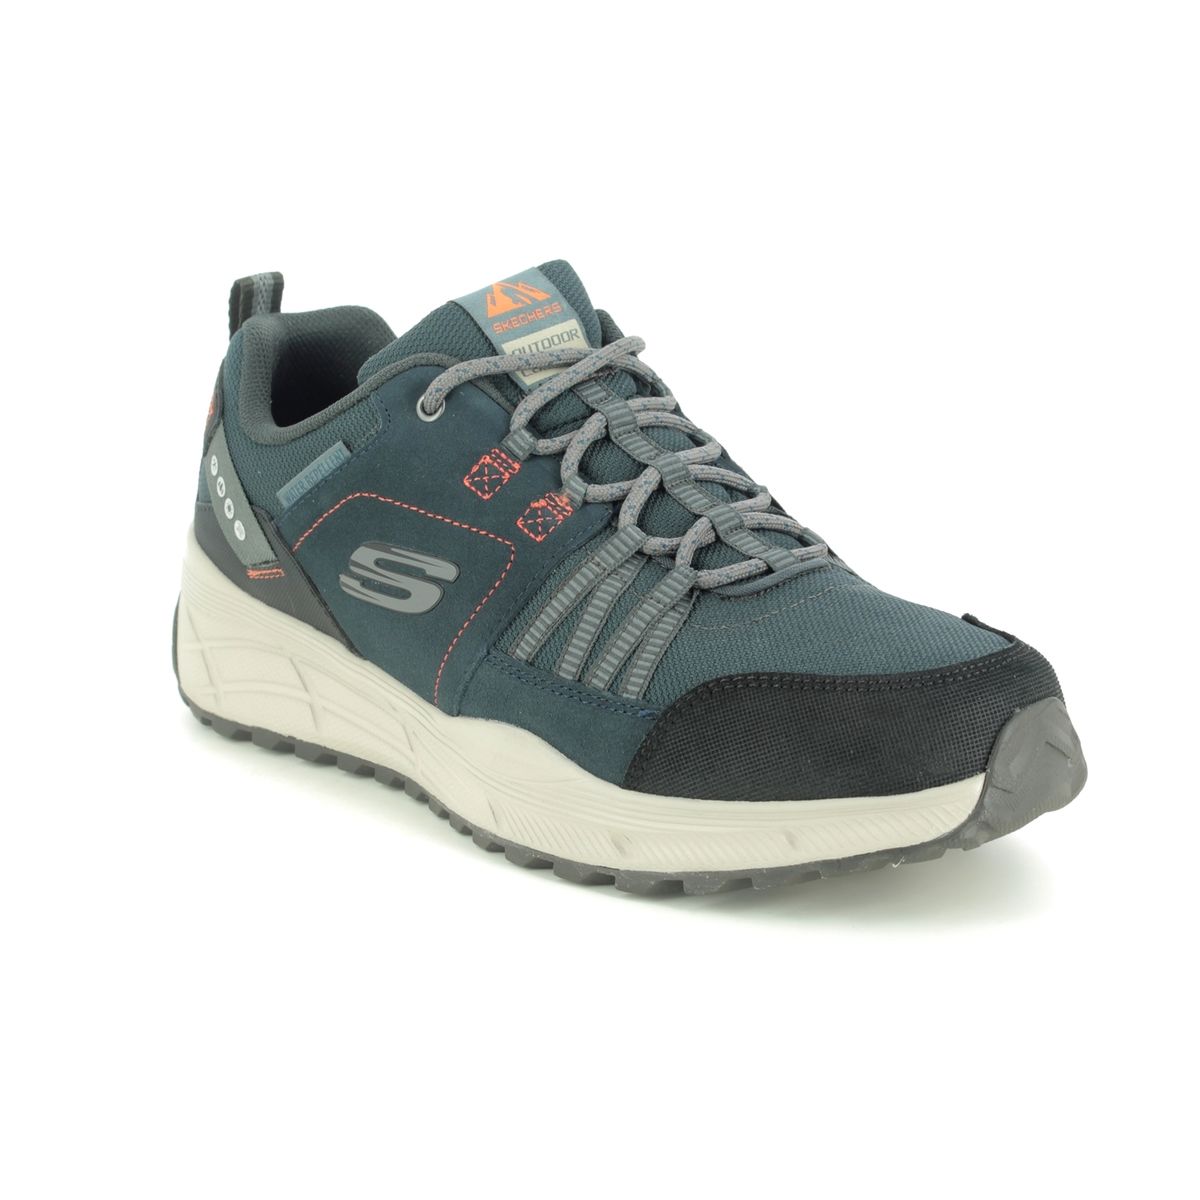 Skechers Equalizer Trail Relaxed Fit NVY Navy Mens trainers 237023 in a Plain Leather and Man-made in Size 9